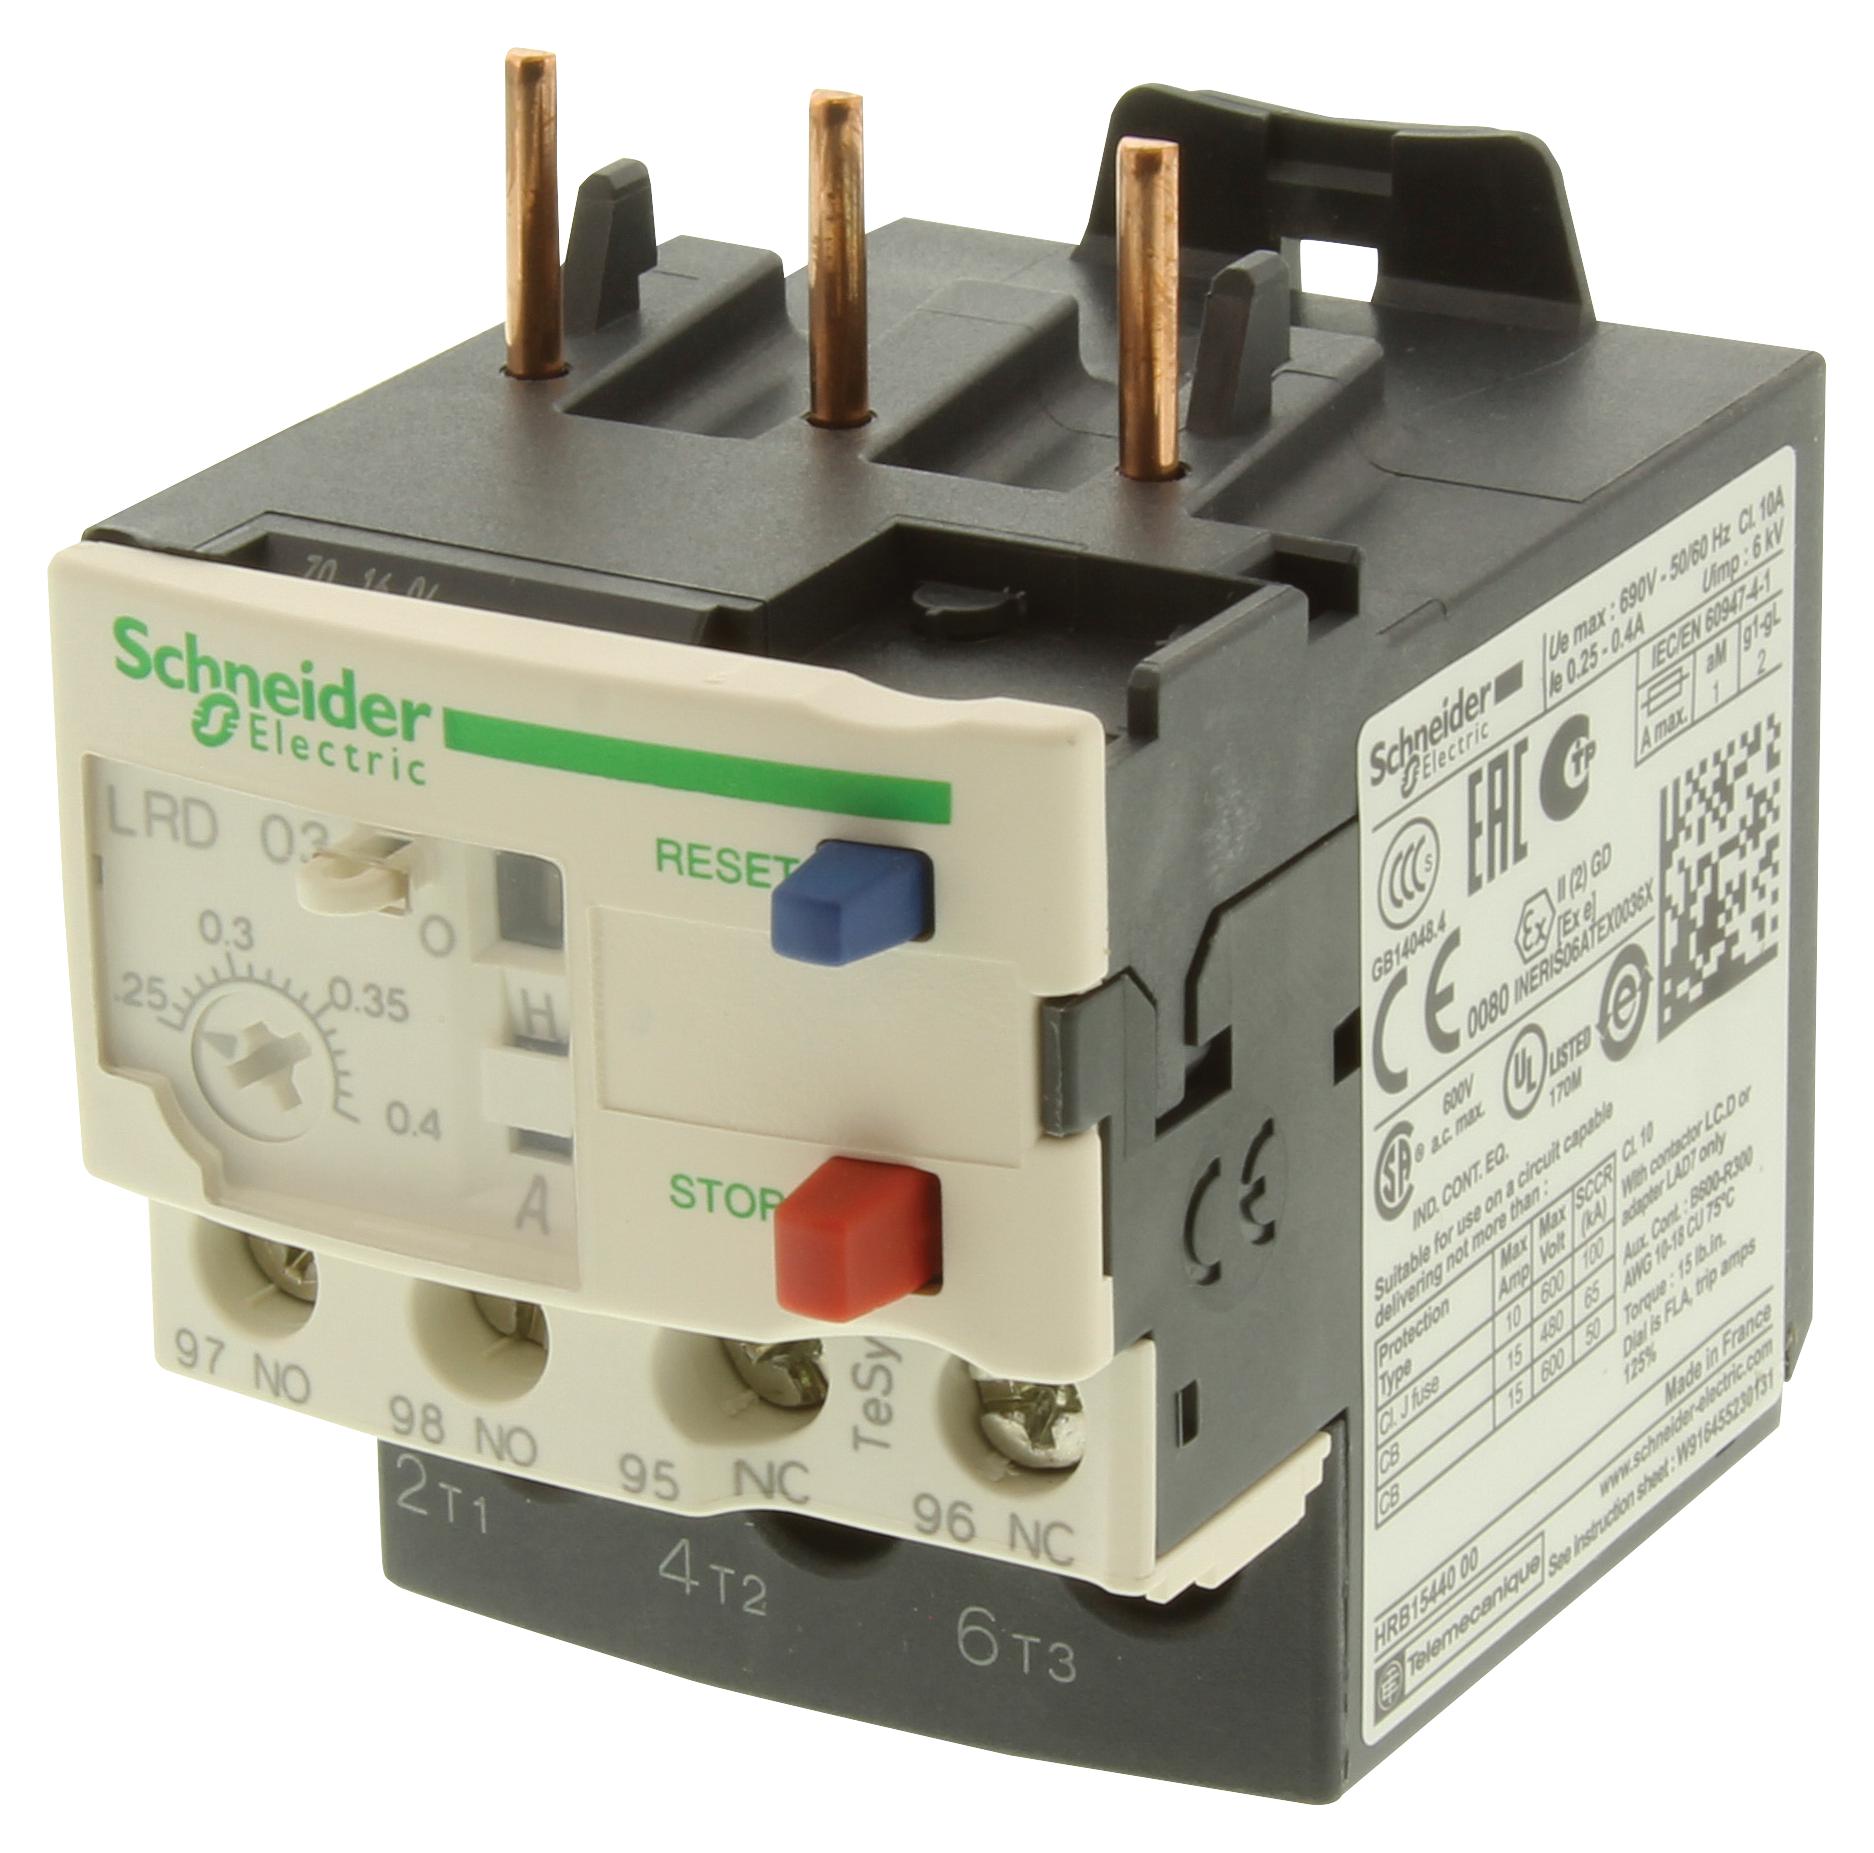 LRD03 THERMAL OVERLOAD RELAY, 0.25-0.4A SCHNEIDER ELECTRIC